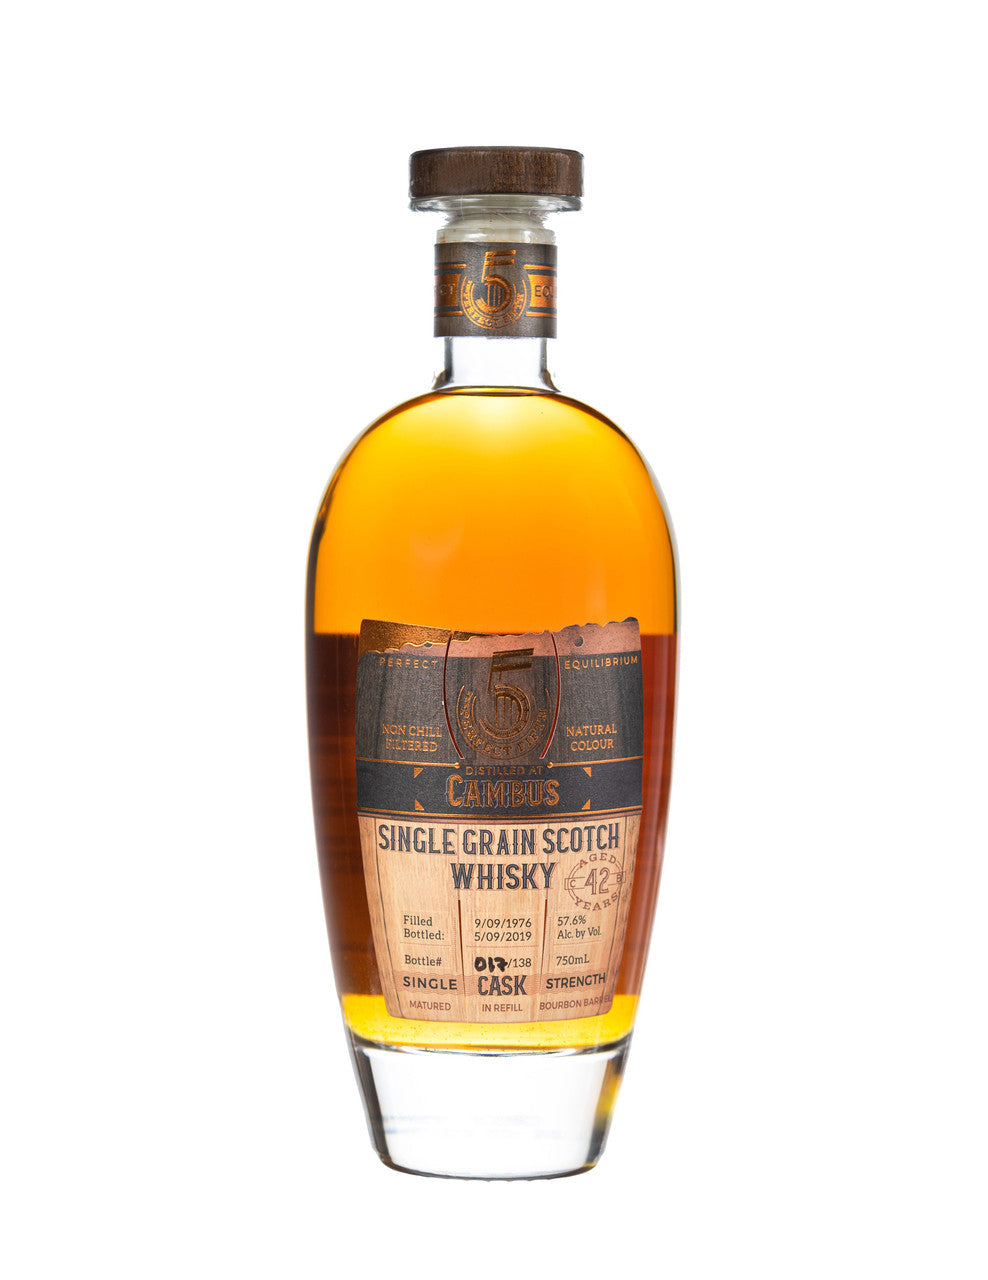 The Perfect Fifth Cambus 42 Year Old Single Grain